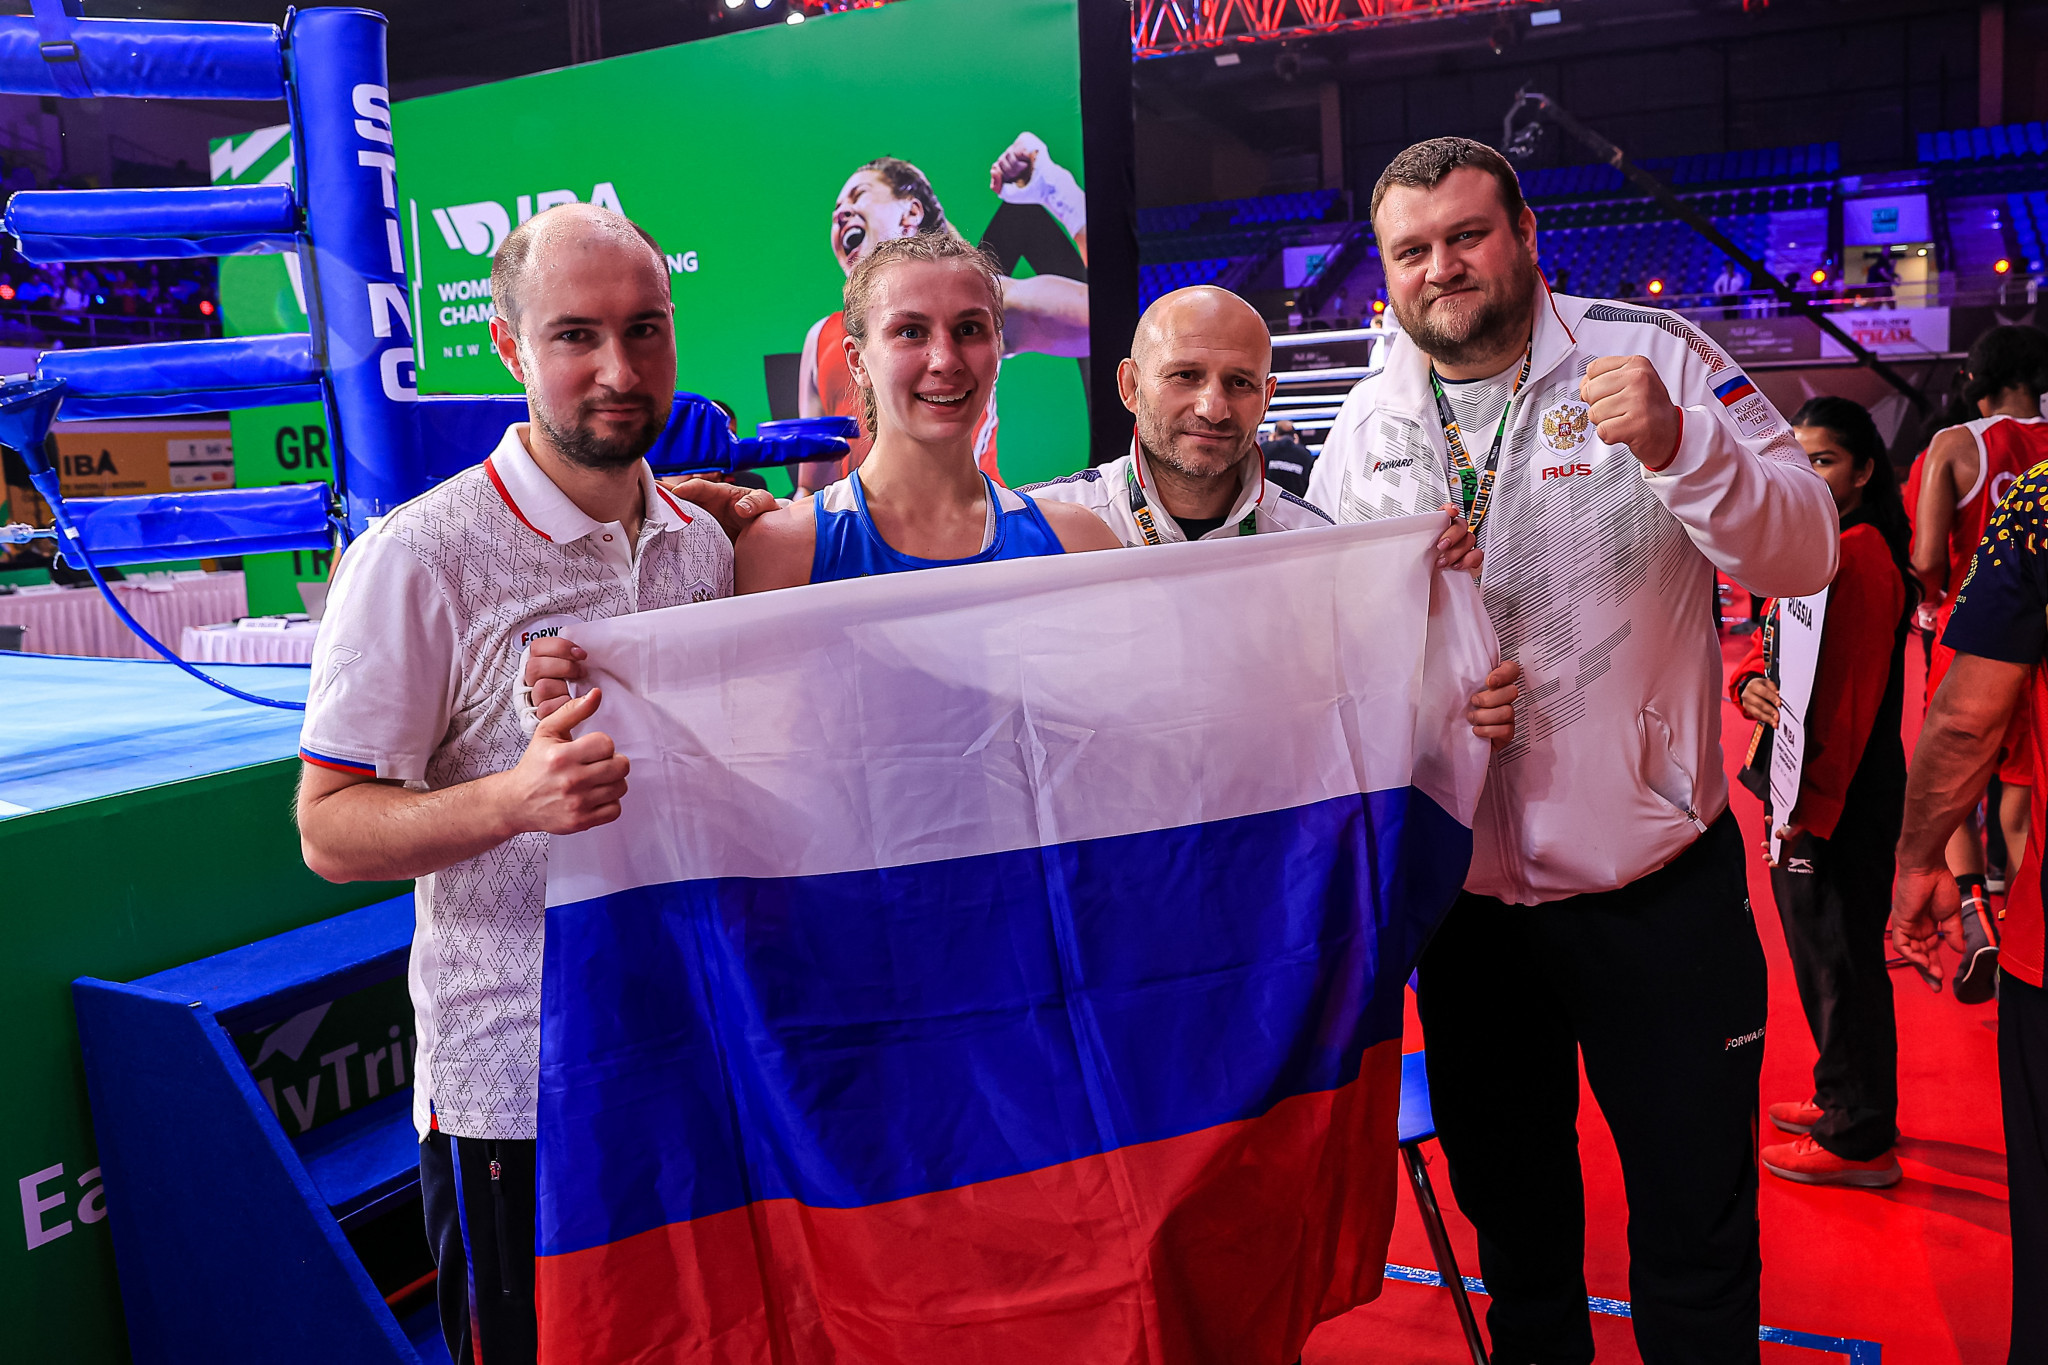 Russian boxers were allowed to compete under their country's flag at the recent IBA Women's World Championships, in contradiction with recommendations issued by the IOC today ©IBA